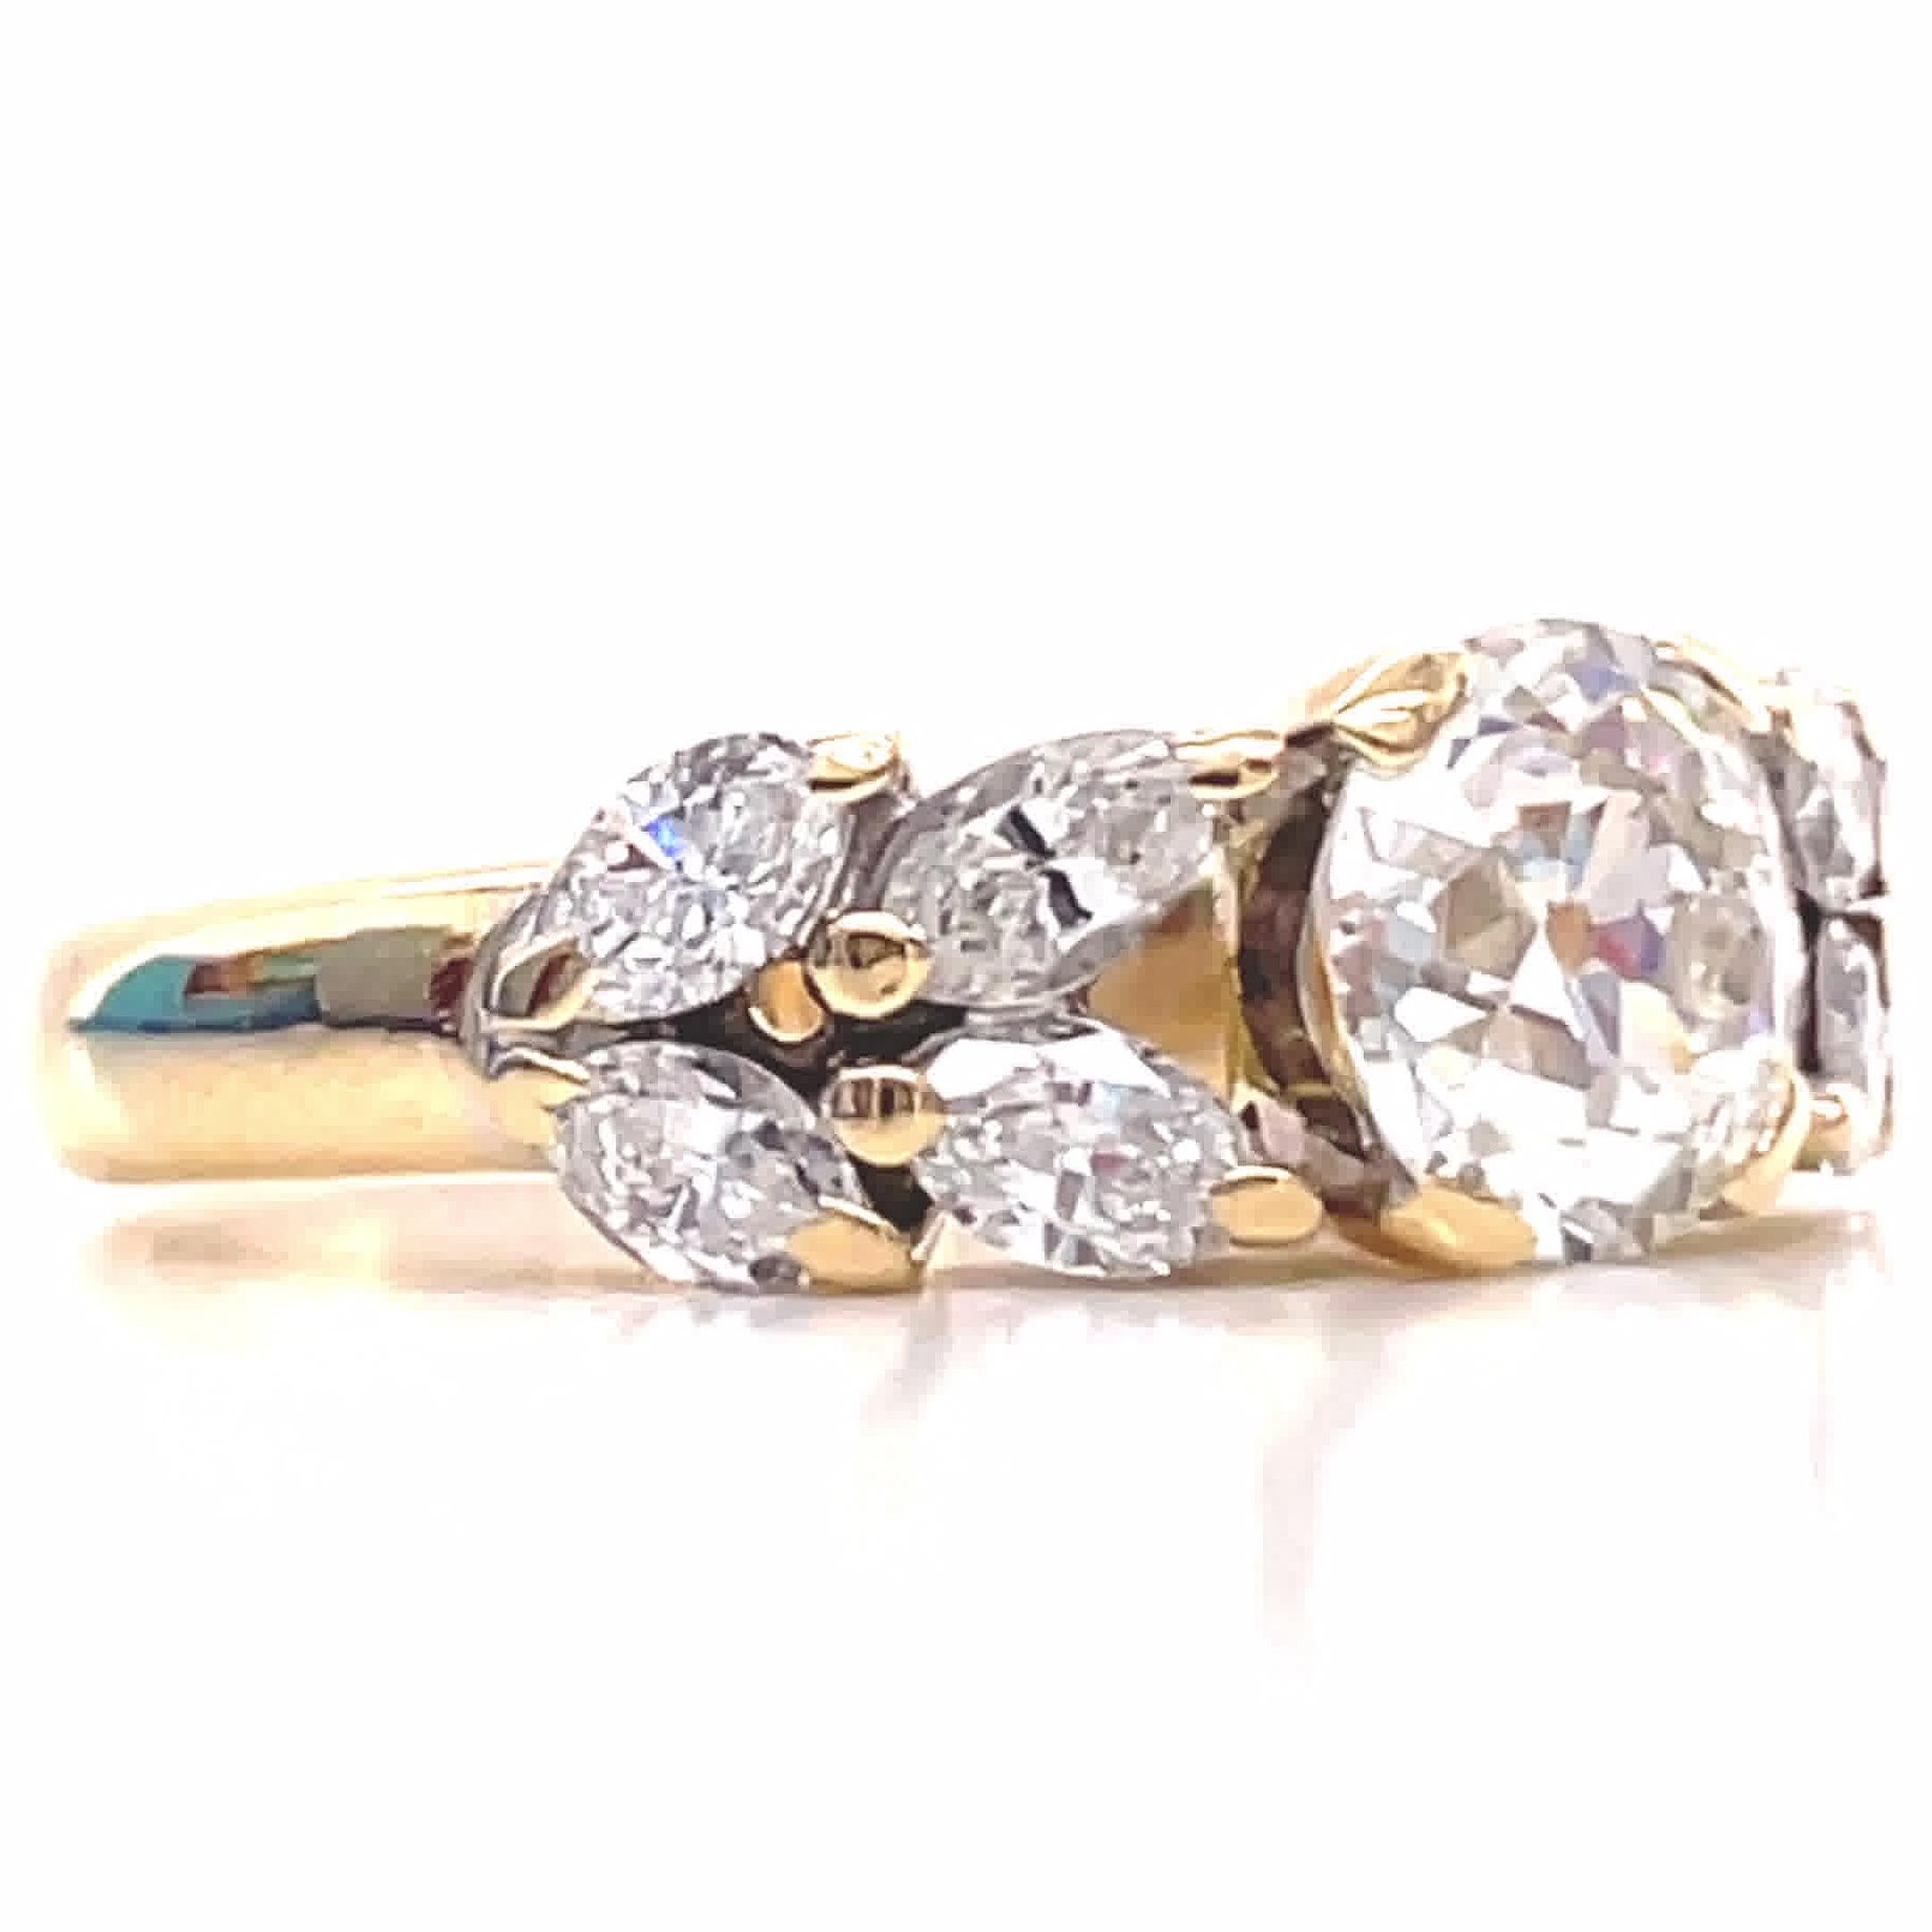 If you are a fan of yellow gold and diamonds, consider this Retro French GIA 1.77 carat Old European Cut Diamond 18k Gold Ring. Classic and timeless, this ring will serve you well and will attract admirers from all corners. The marquise cut diamonds